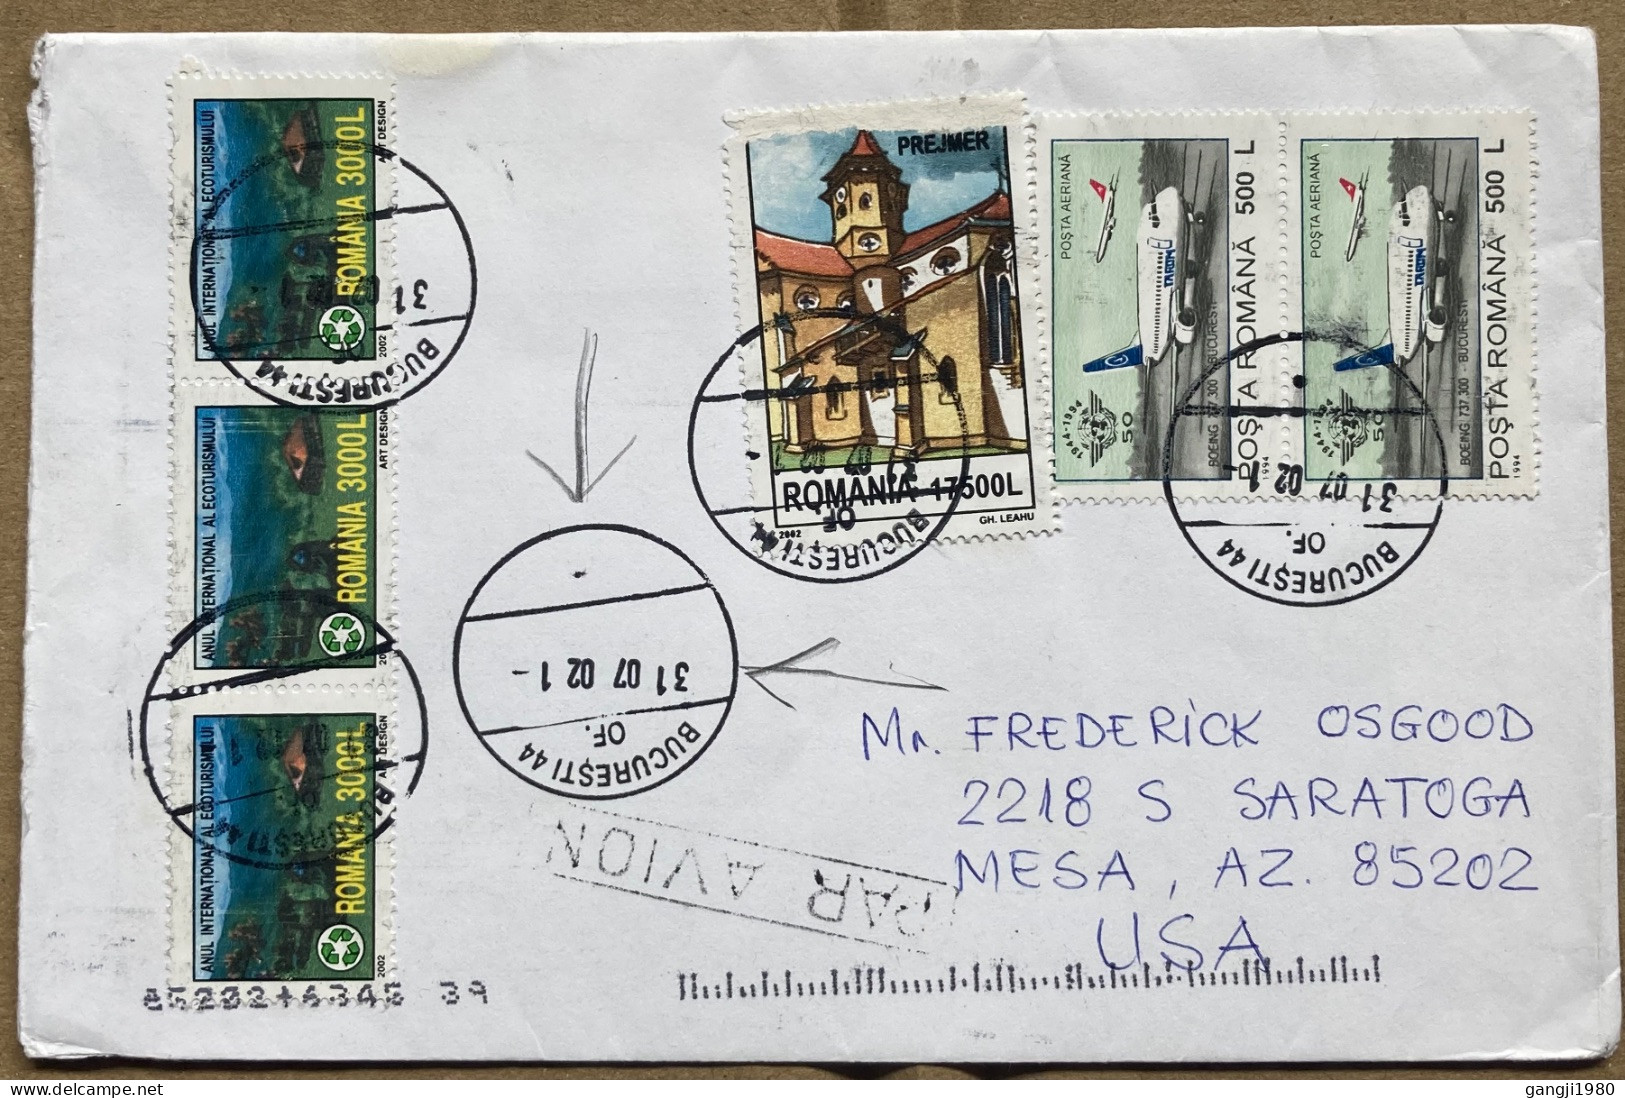 ROMANIA 2002, COVER USED TO USA, 6 STAMP, ECO-TOURISM, PREJMER BUILDING, HERITAGE, BOEING AEROPLANE, BUCHAREST CITY CANC - Covers & Documents